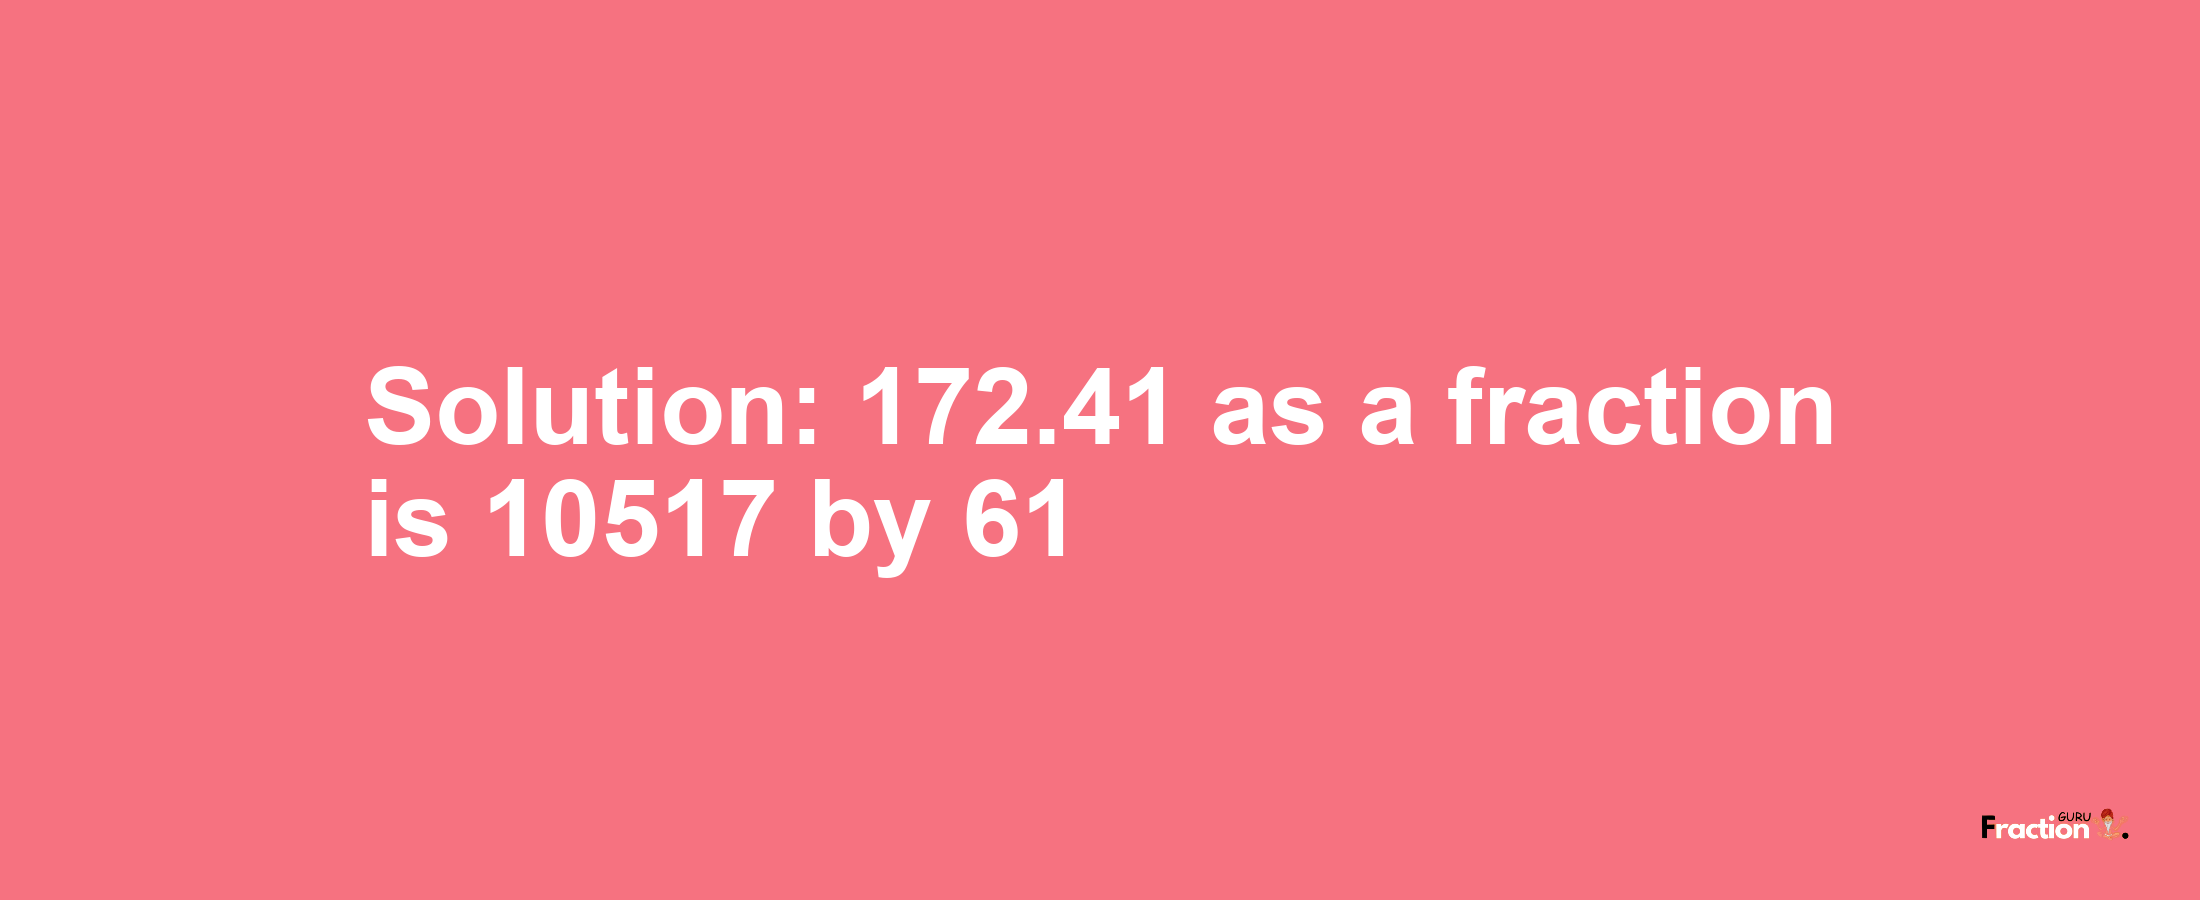 Solution:172.41 as a fraction is 10517/61